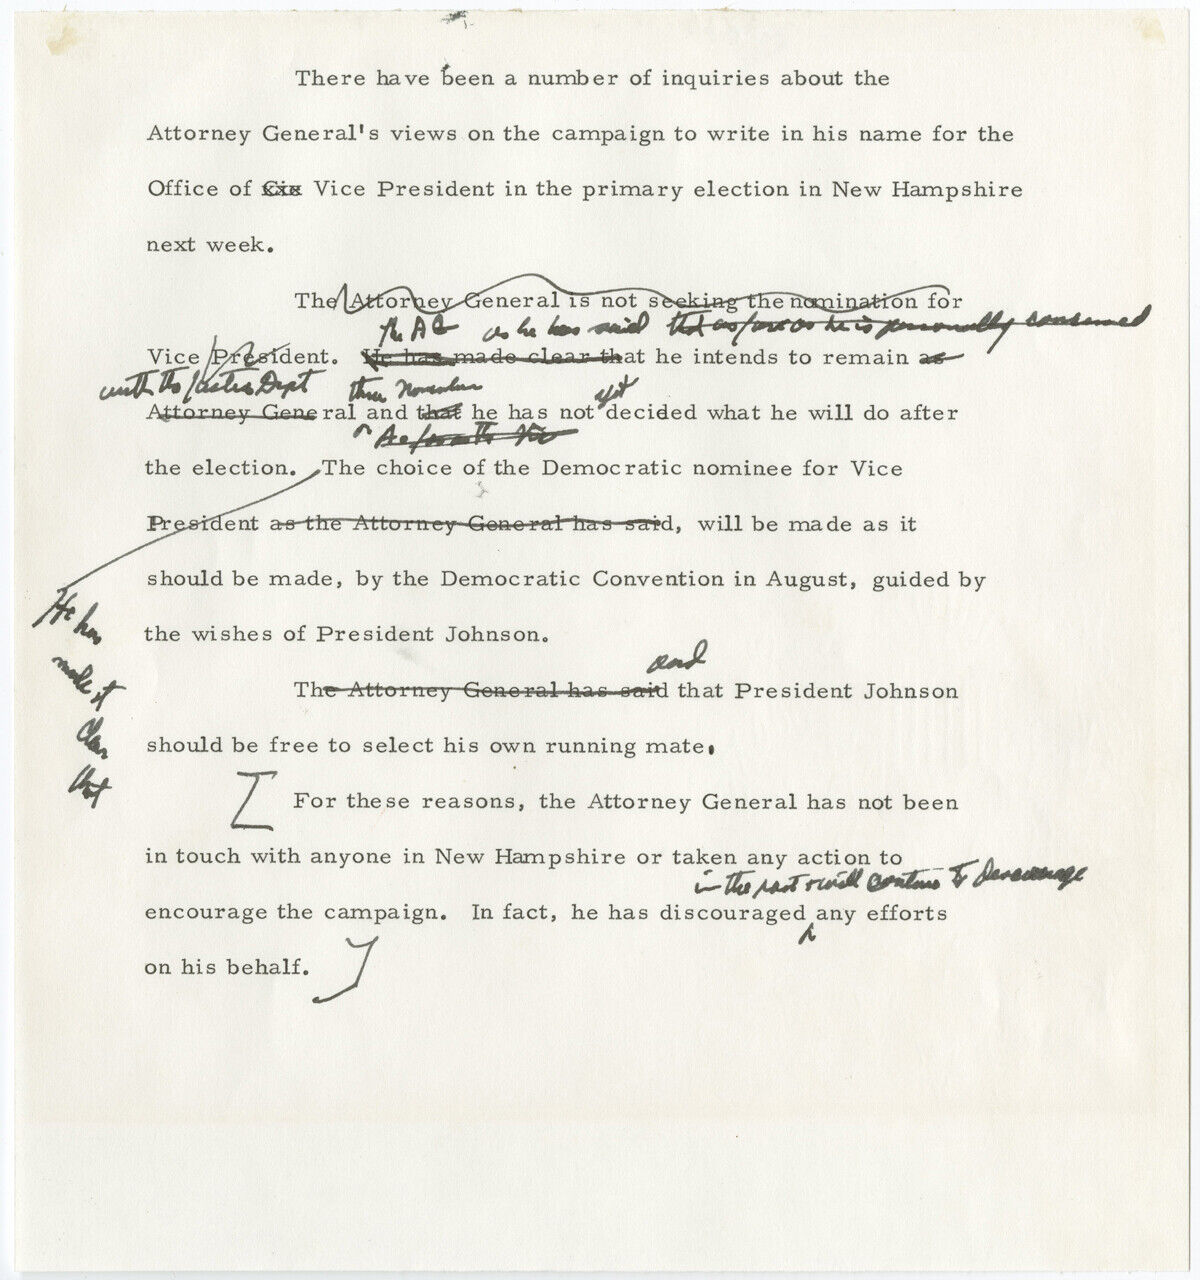 1964 Robert Kennedy Draft Press Release Discouraging a Write-In Campaign (RARE)